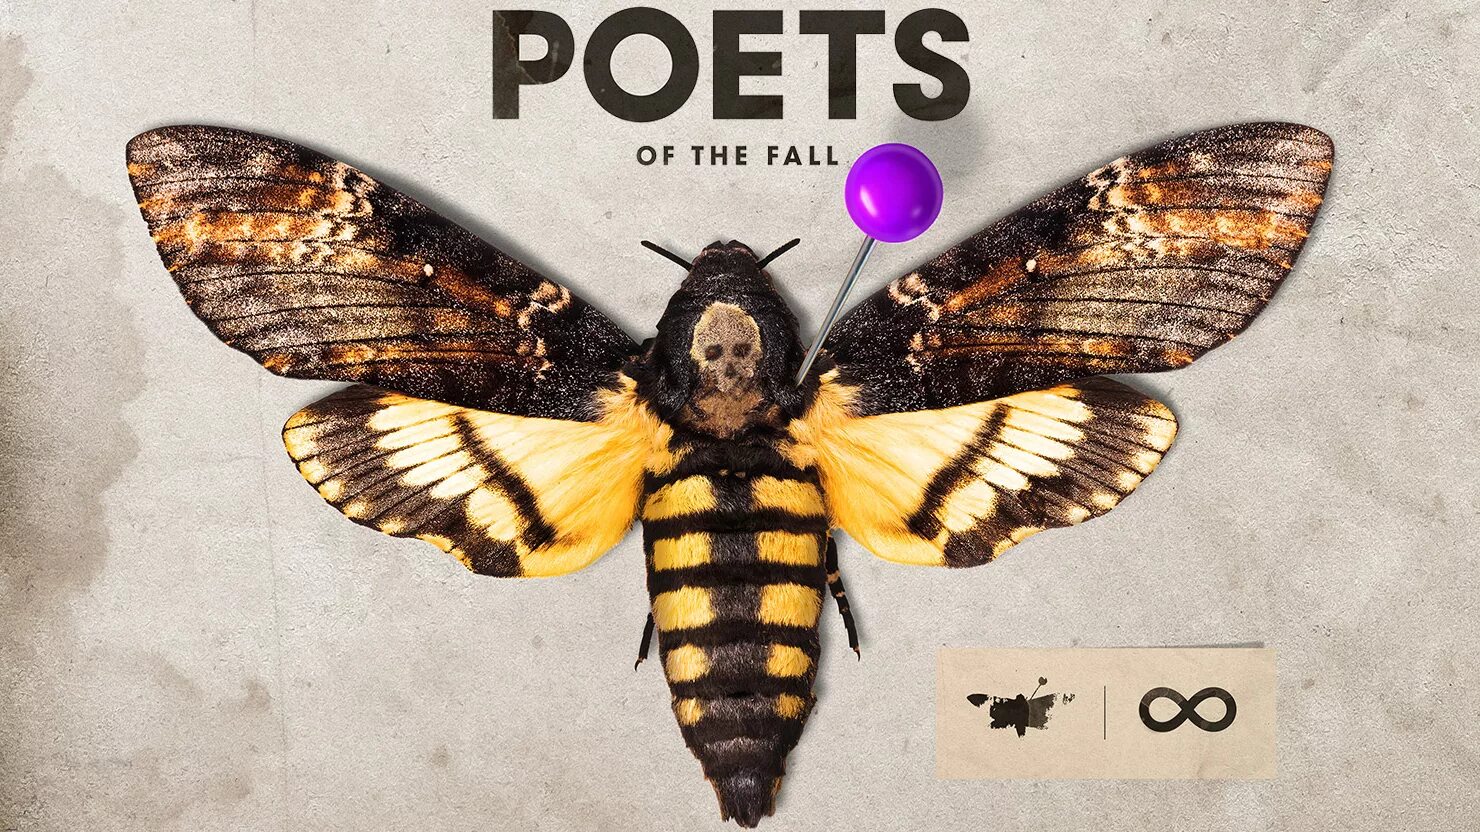 Poets of the Fall Ultraviolet. Poets of the Fall логотип. Ultraviolet (poets of the Fall album). Poets of the Fall альбомы. Great poet